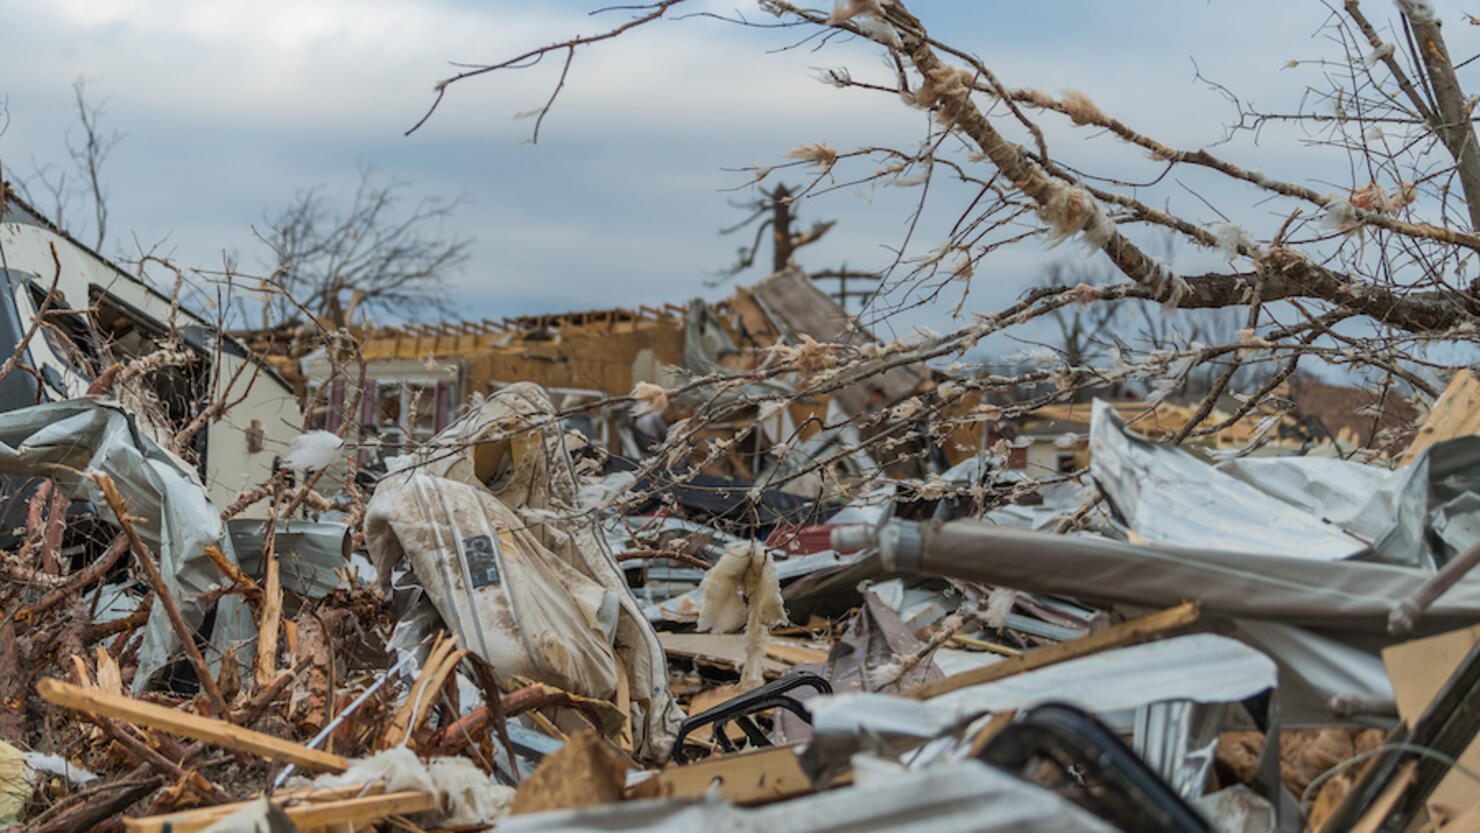 Garbage and debris in Tennessee after tornado destroyed homes